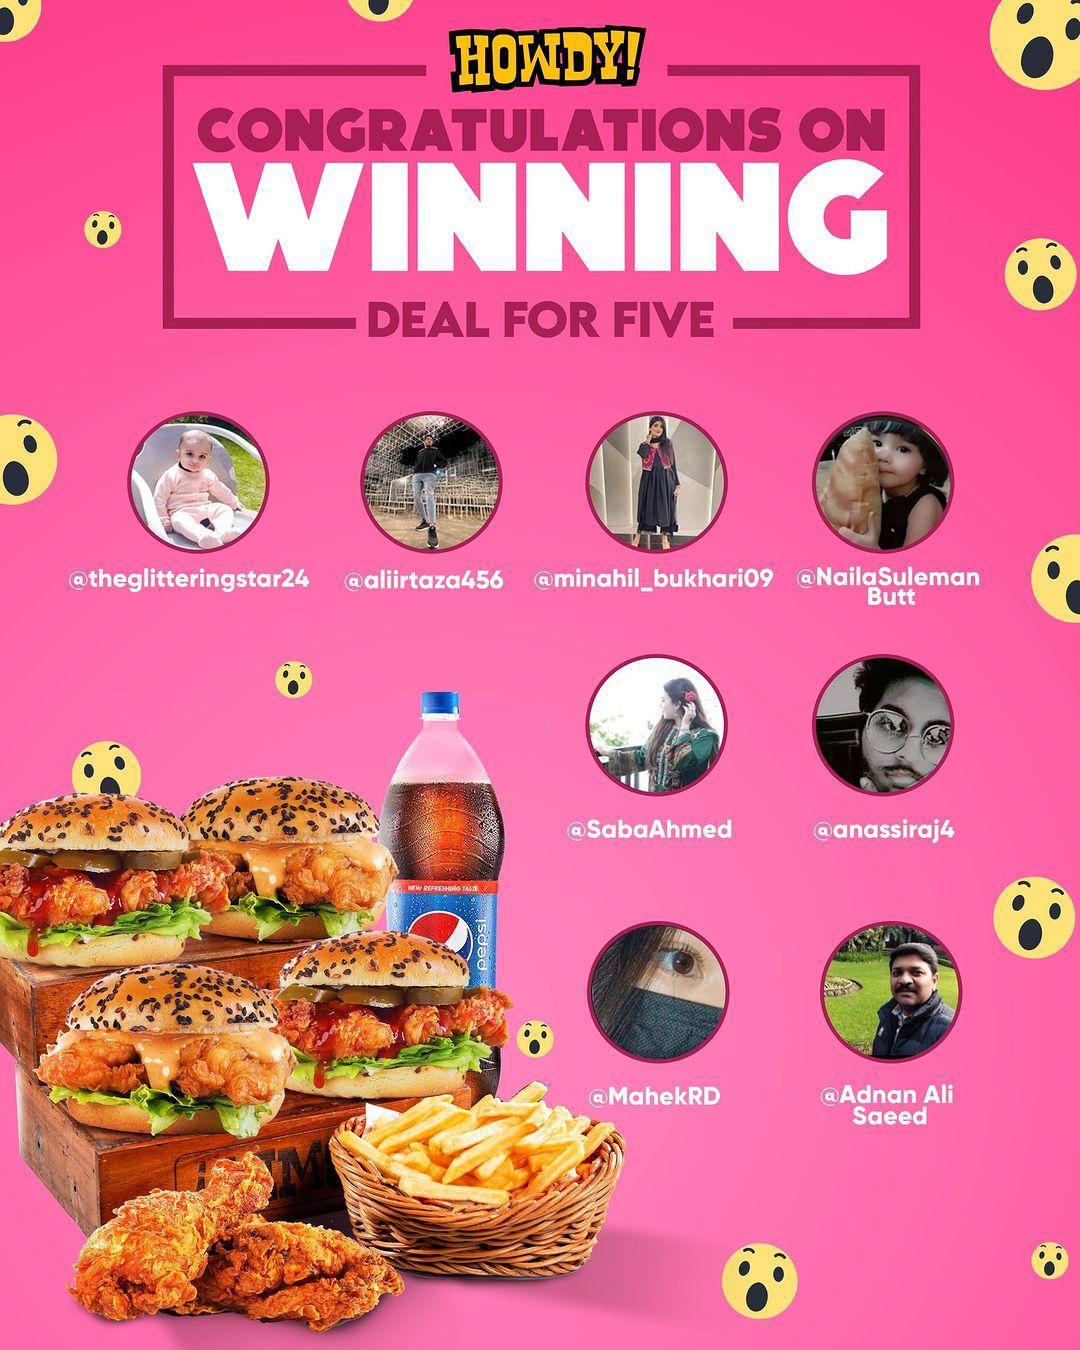 class="content__text"
 Congratulations on winning a FREE deal for 5 pardners! Enjoy a WOWDY time with your friends, on the house!
@theglitteringstar24@aliirtaza456@minahil_bukhari09@NailaSulemanButt@SabaAhmed@anassiraj4@MahekRD@AdnanAliSaeed 

 #Howdy #howdypakistan #howdyislamabad #bestburgersintown #islamabadfood #lahorefoodies #Pakistan #Islamabad #Lahore #itshappyning #burgers #fries #foodlovers #foodstagram #delivery #DealsAndDiscounts #deals #HowdyApp 
 